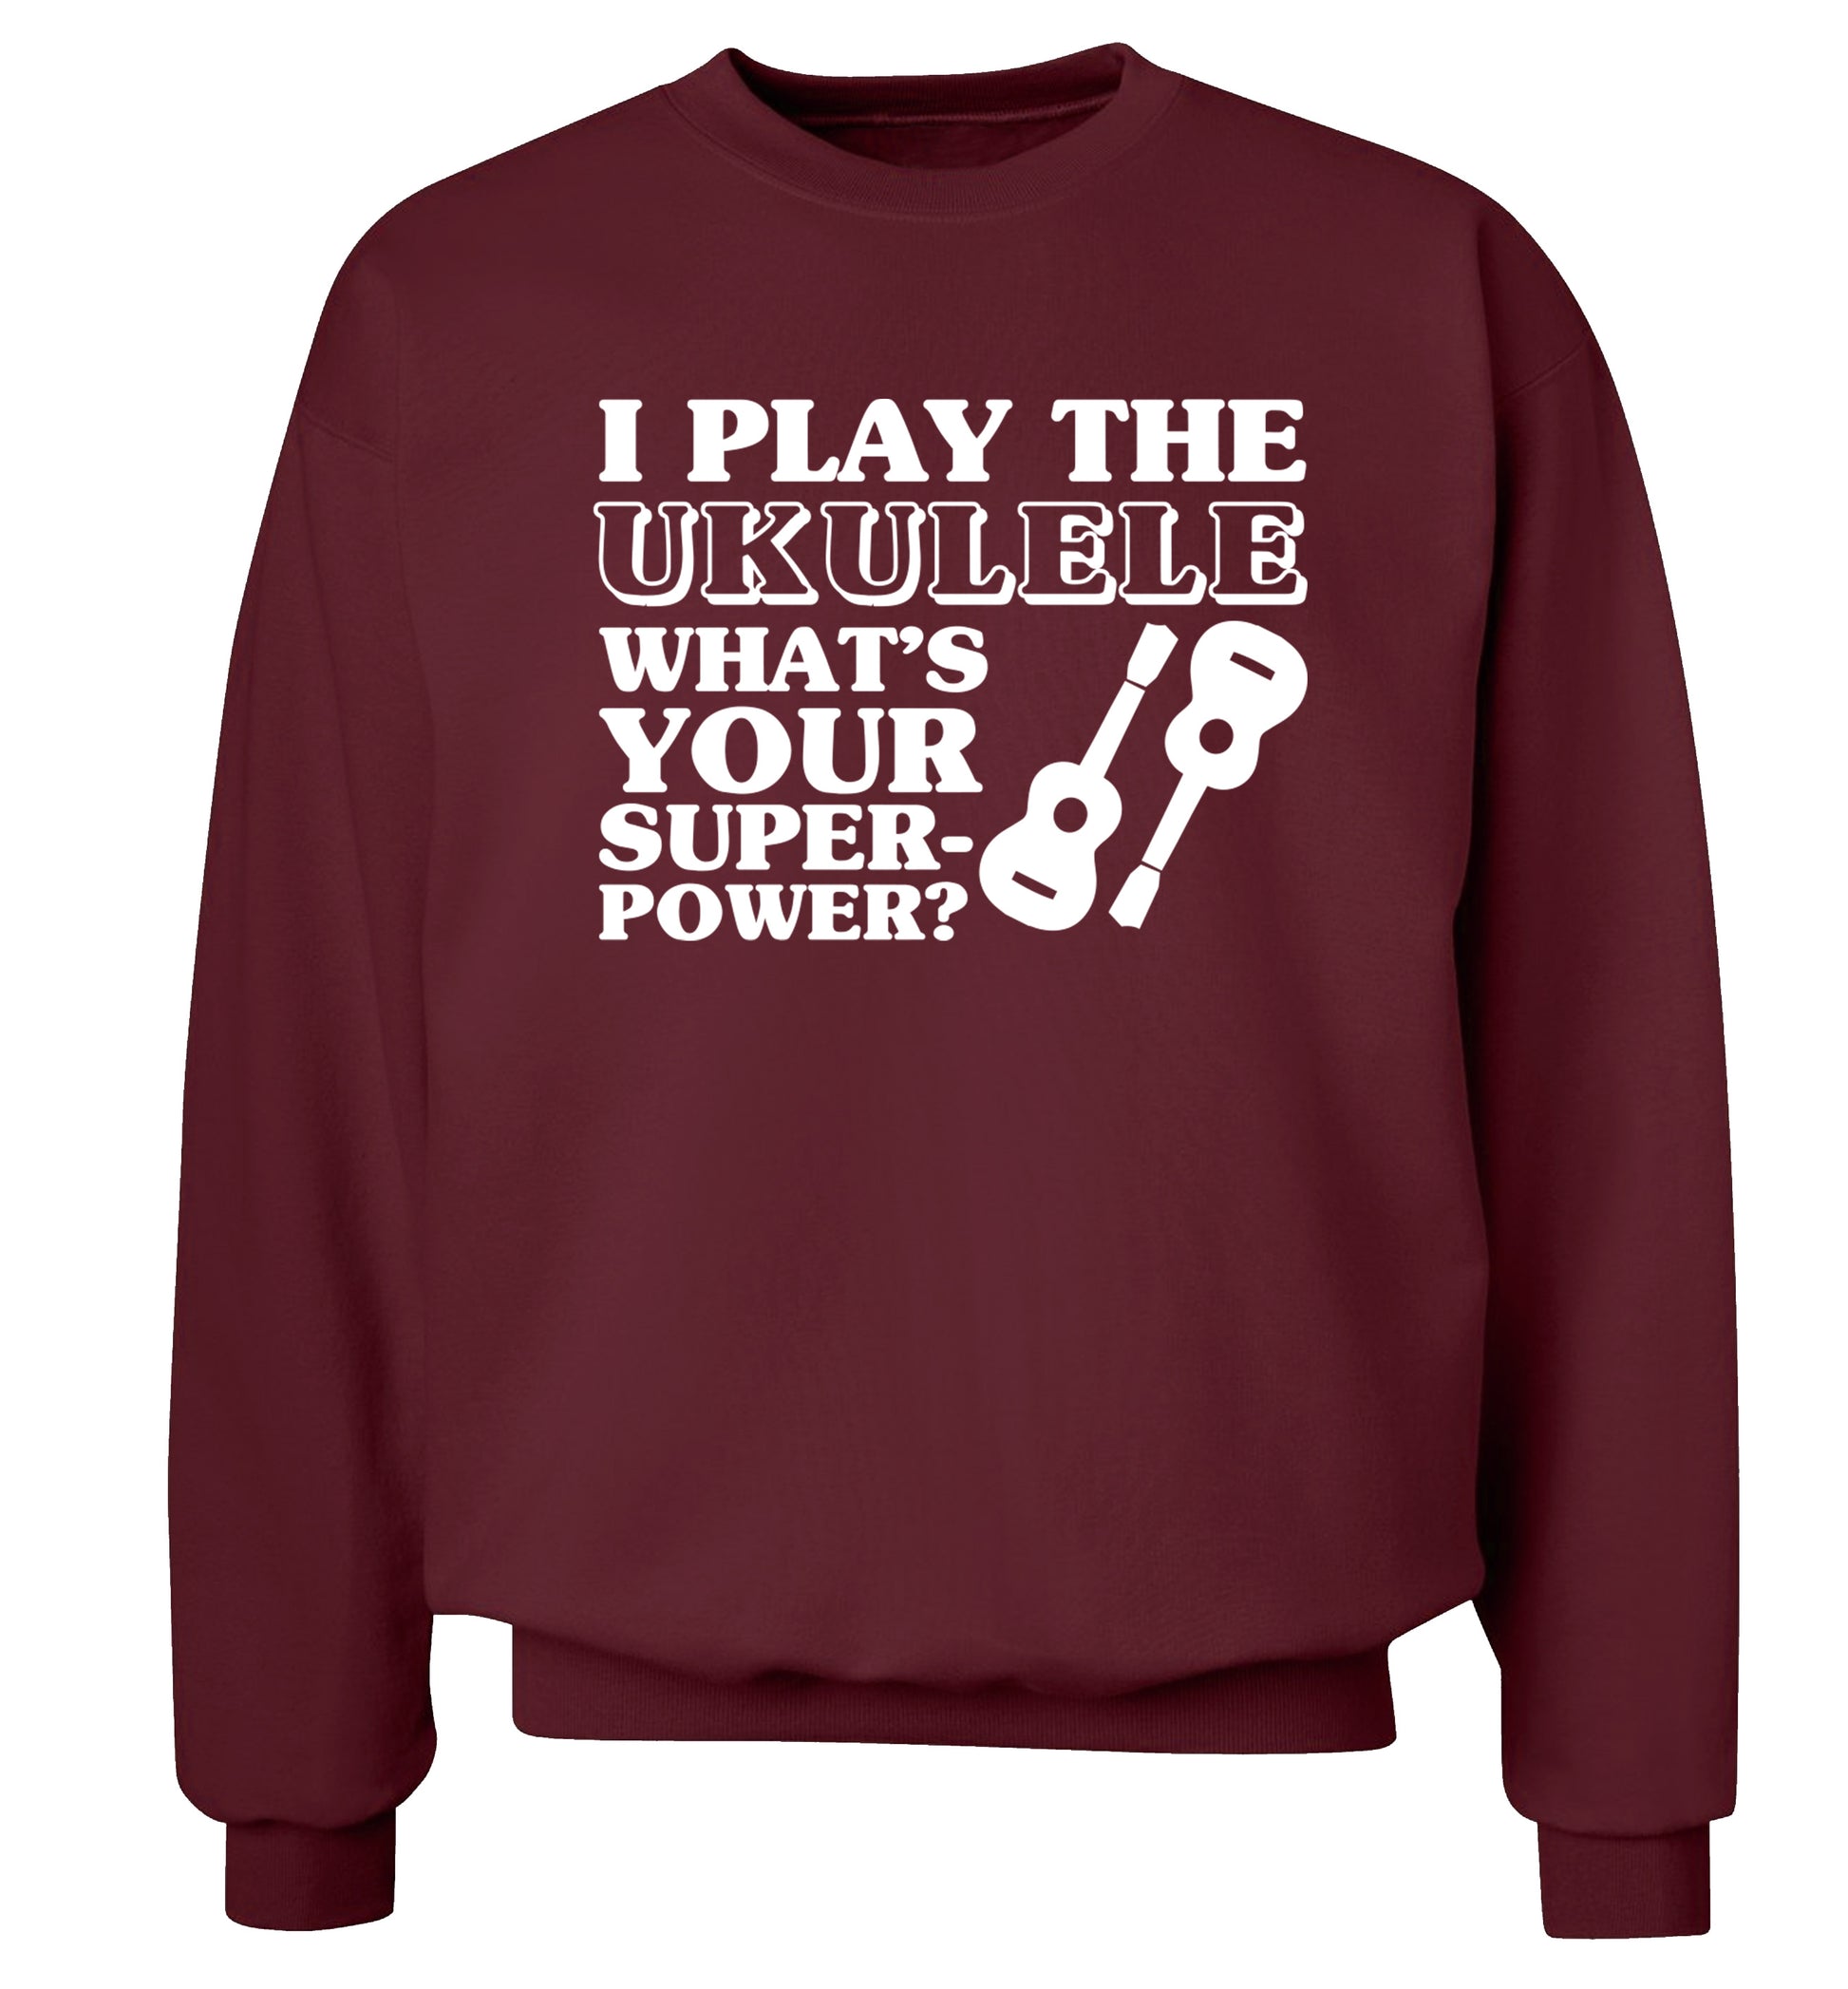 I play the ukulele what's your superpower? Adult's unisex maroon Sweater 2XL